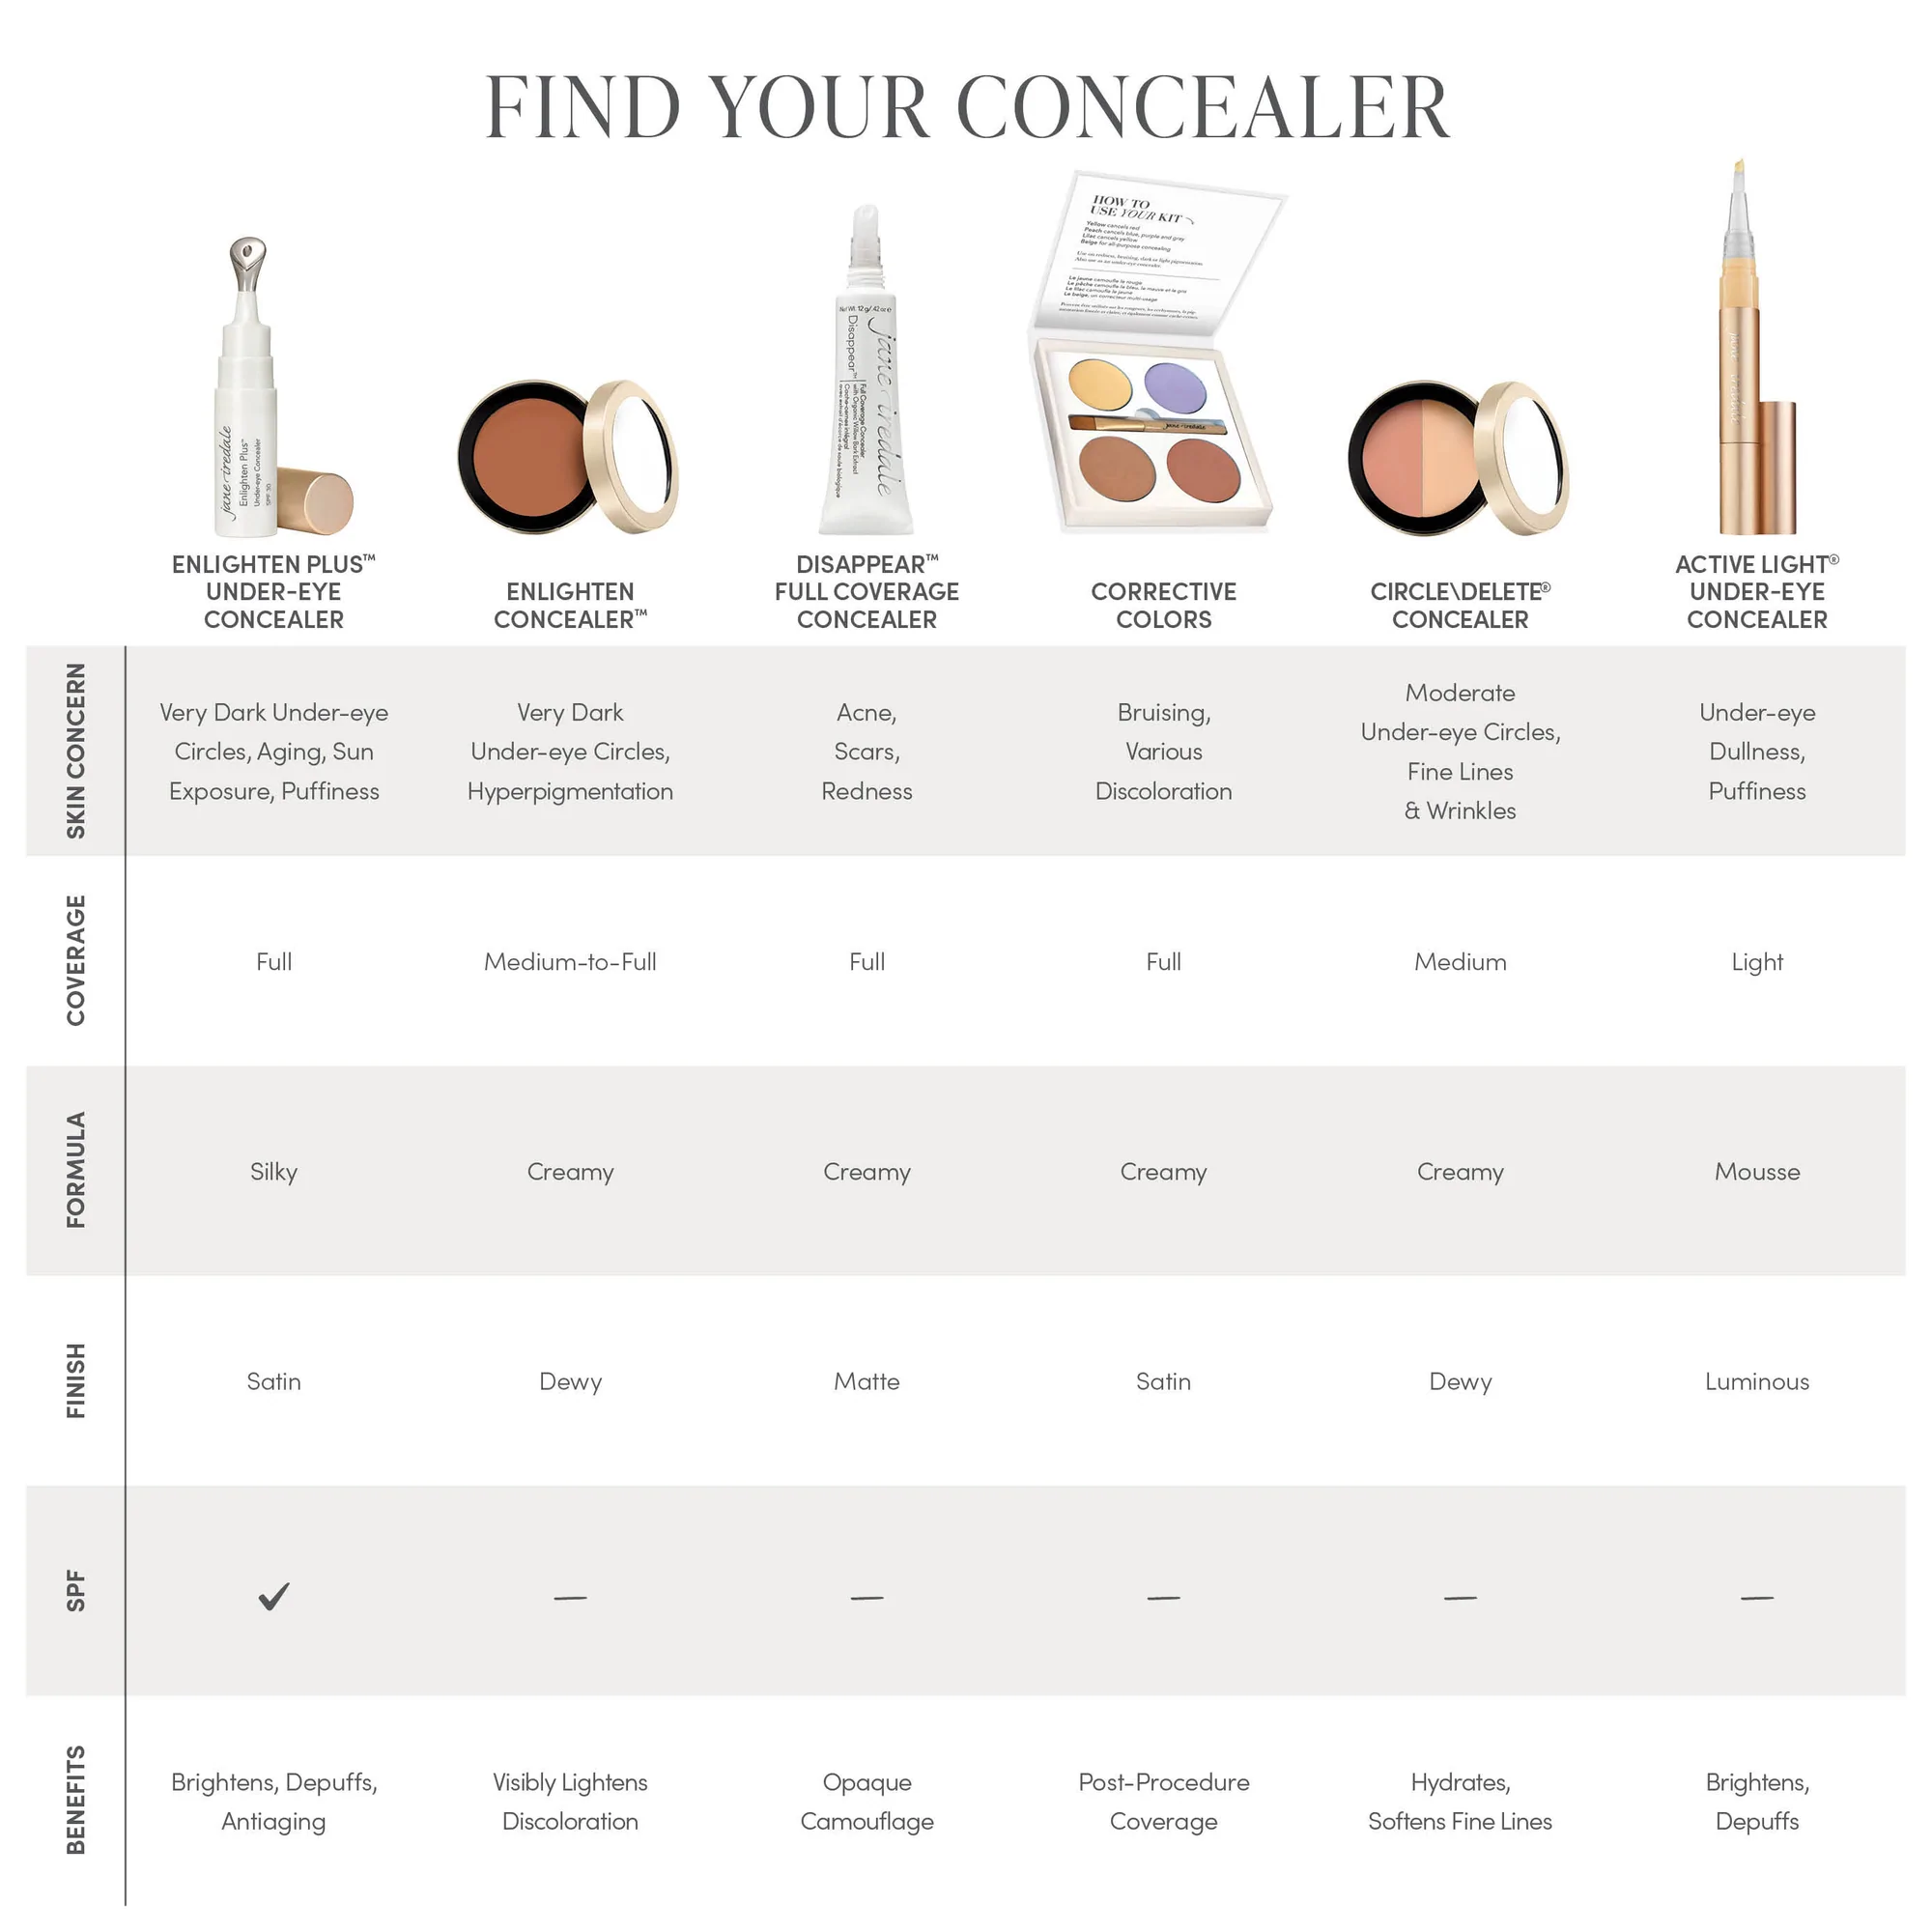 Jane Iredale Corrective Colors 8g12